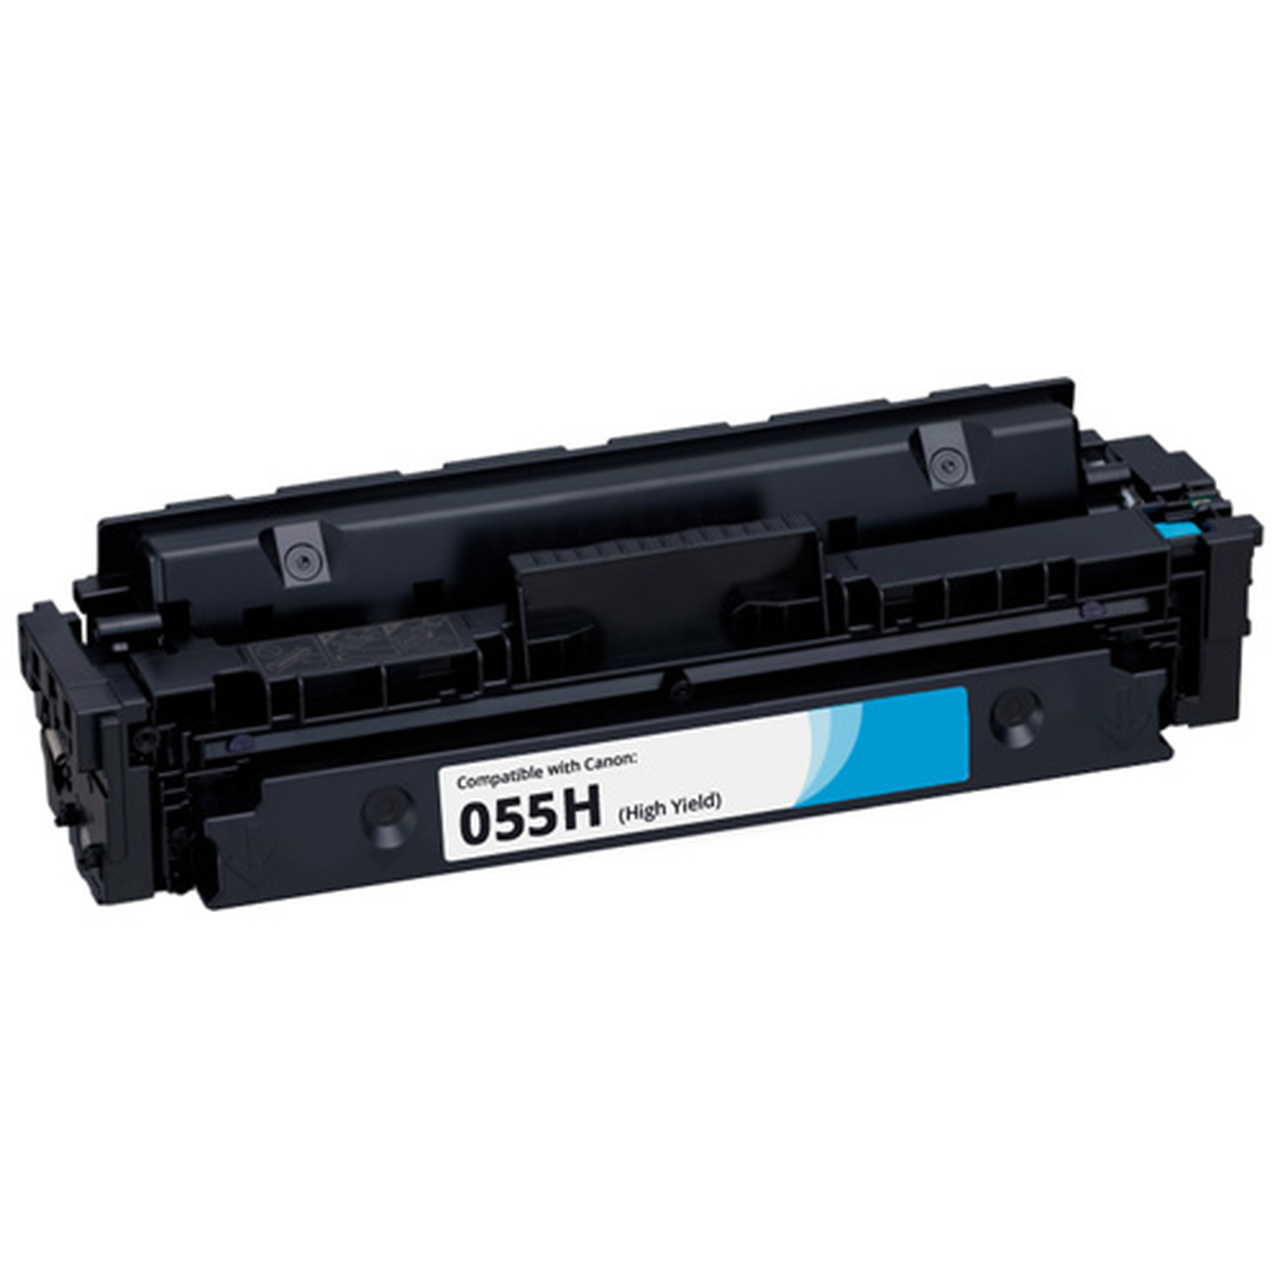 Canon 055H WITH CHIP 3019C001 High Yield CYAN Toner Cartridge for MF741 MF743 MF745 MF746 & mo